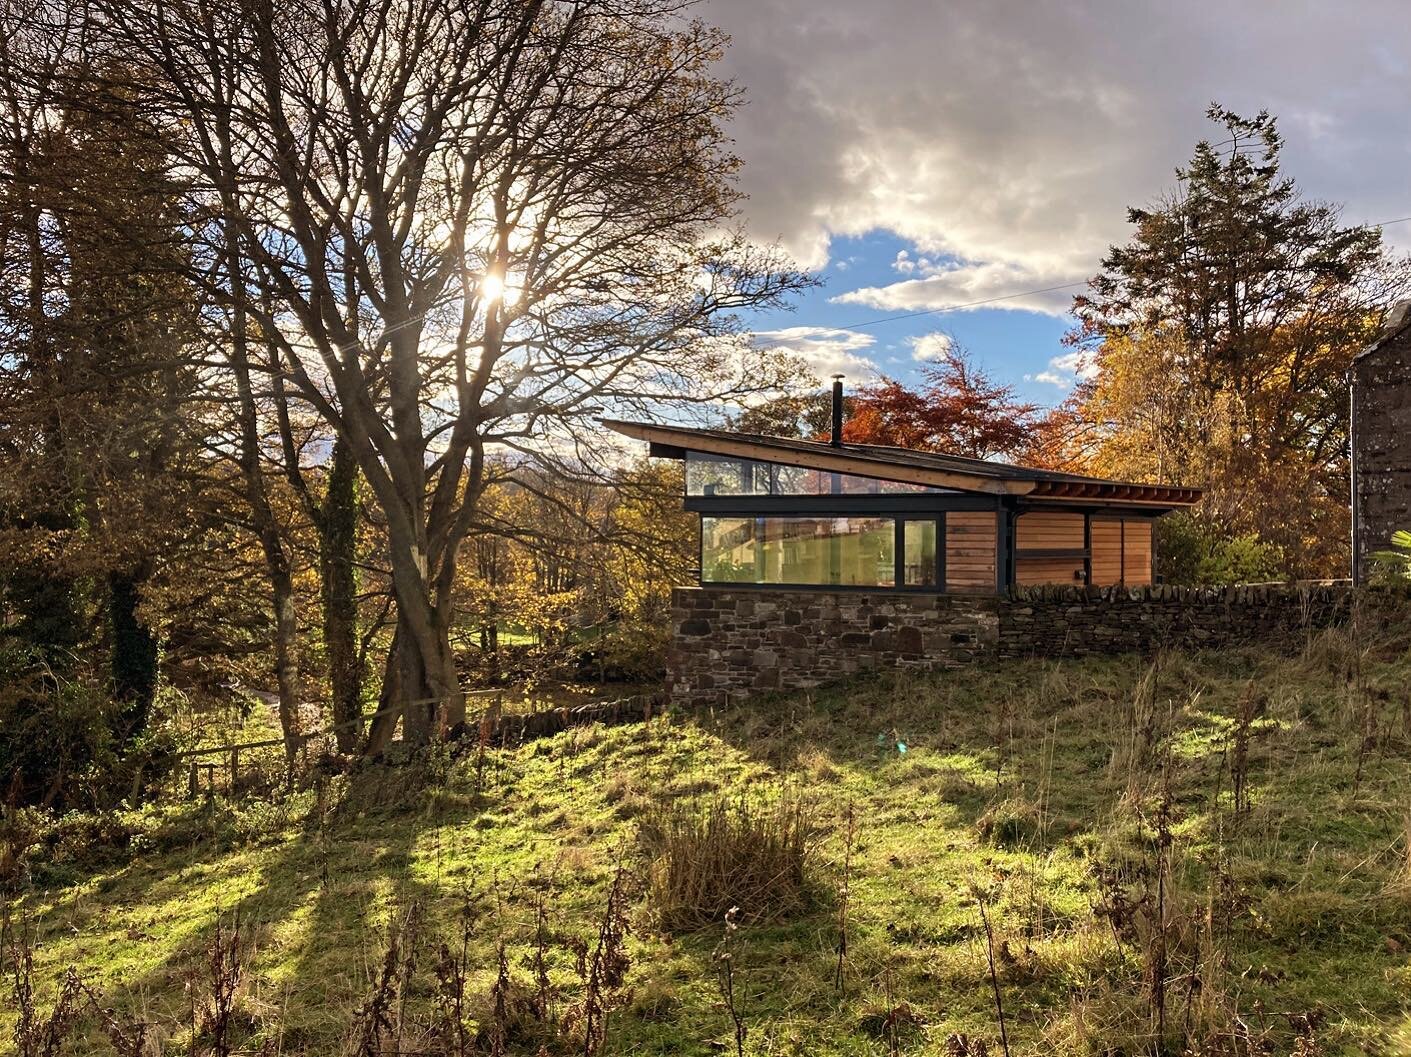 A beautiful day to revisit Rescobie, a year after the completion of our garden pavilion.

#gardenpavilion 
#gardenroom 
#autumnsun 
#angus 
#architecture 
#scottisharchitecture 
#edinburgharchitect 
#outpost 
#drystonewall 
#countryliving 
#krisgrant